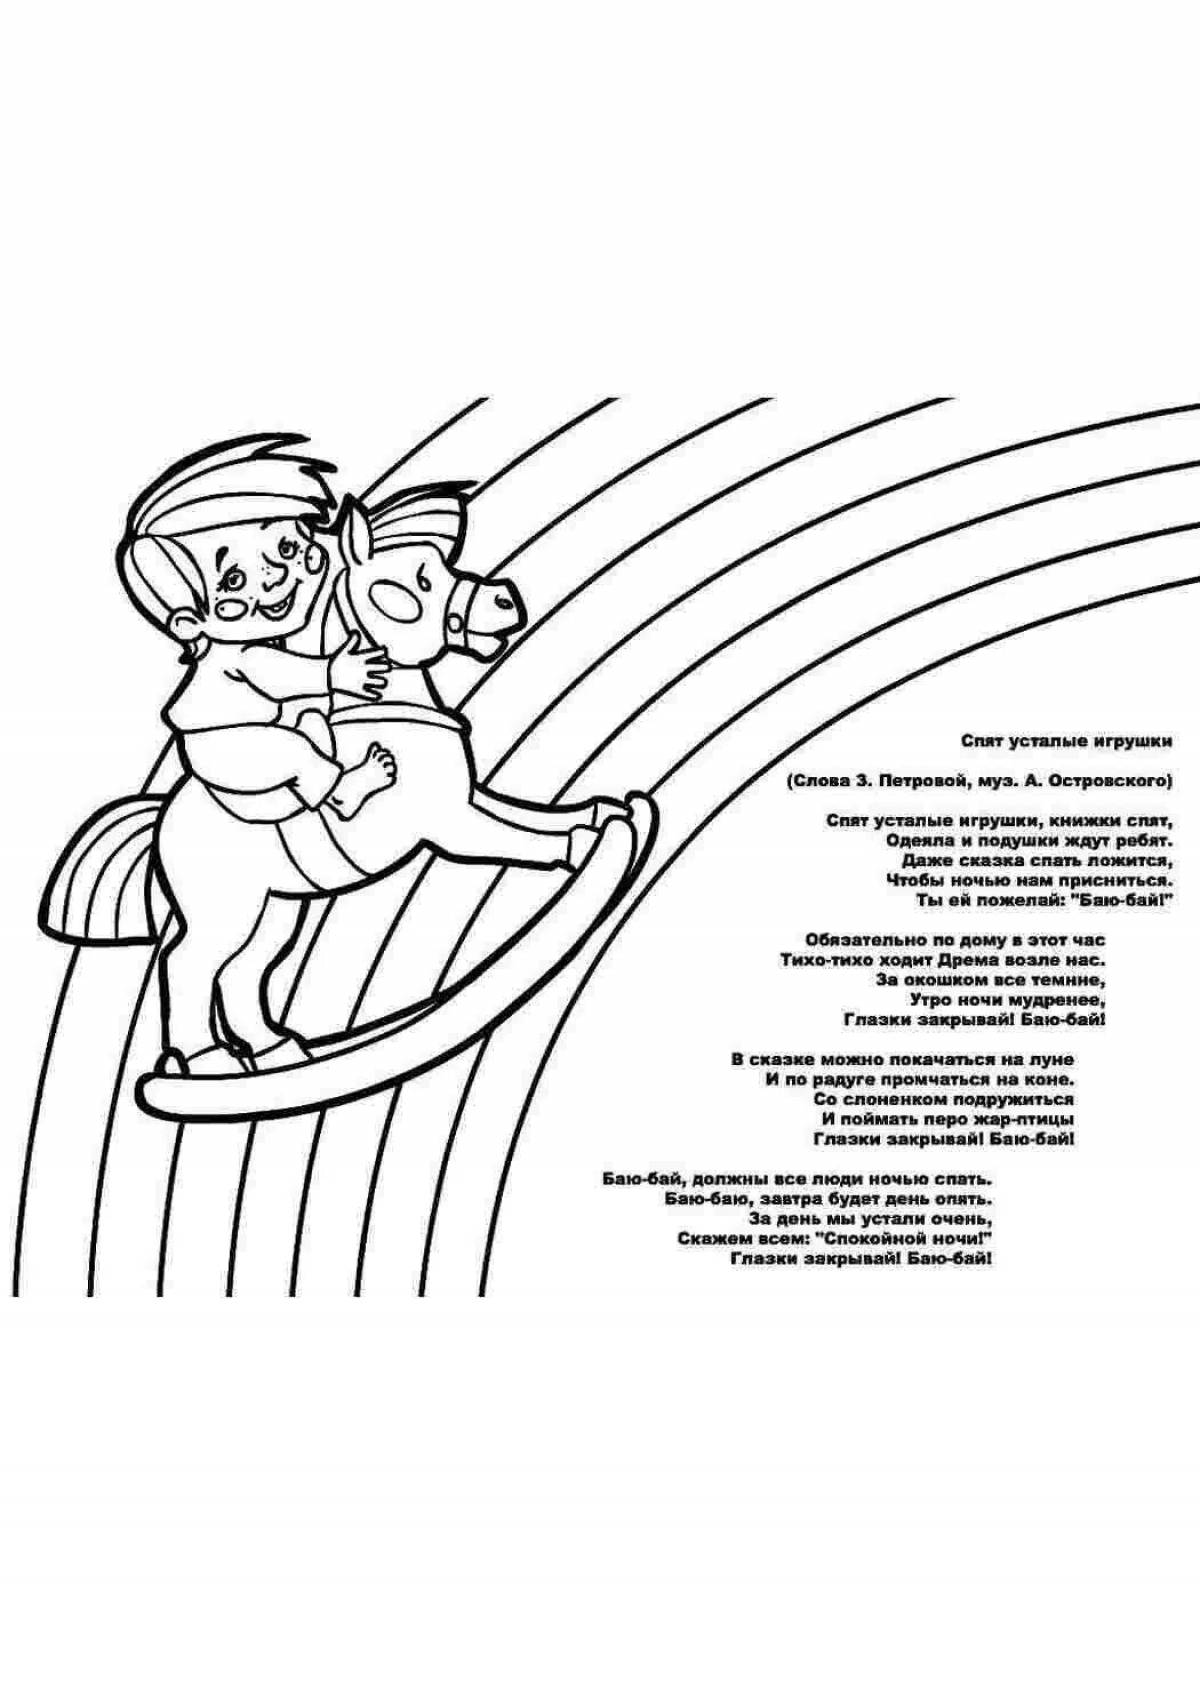 Delightful poetry coloring page